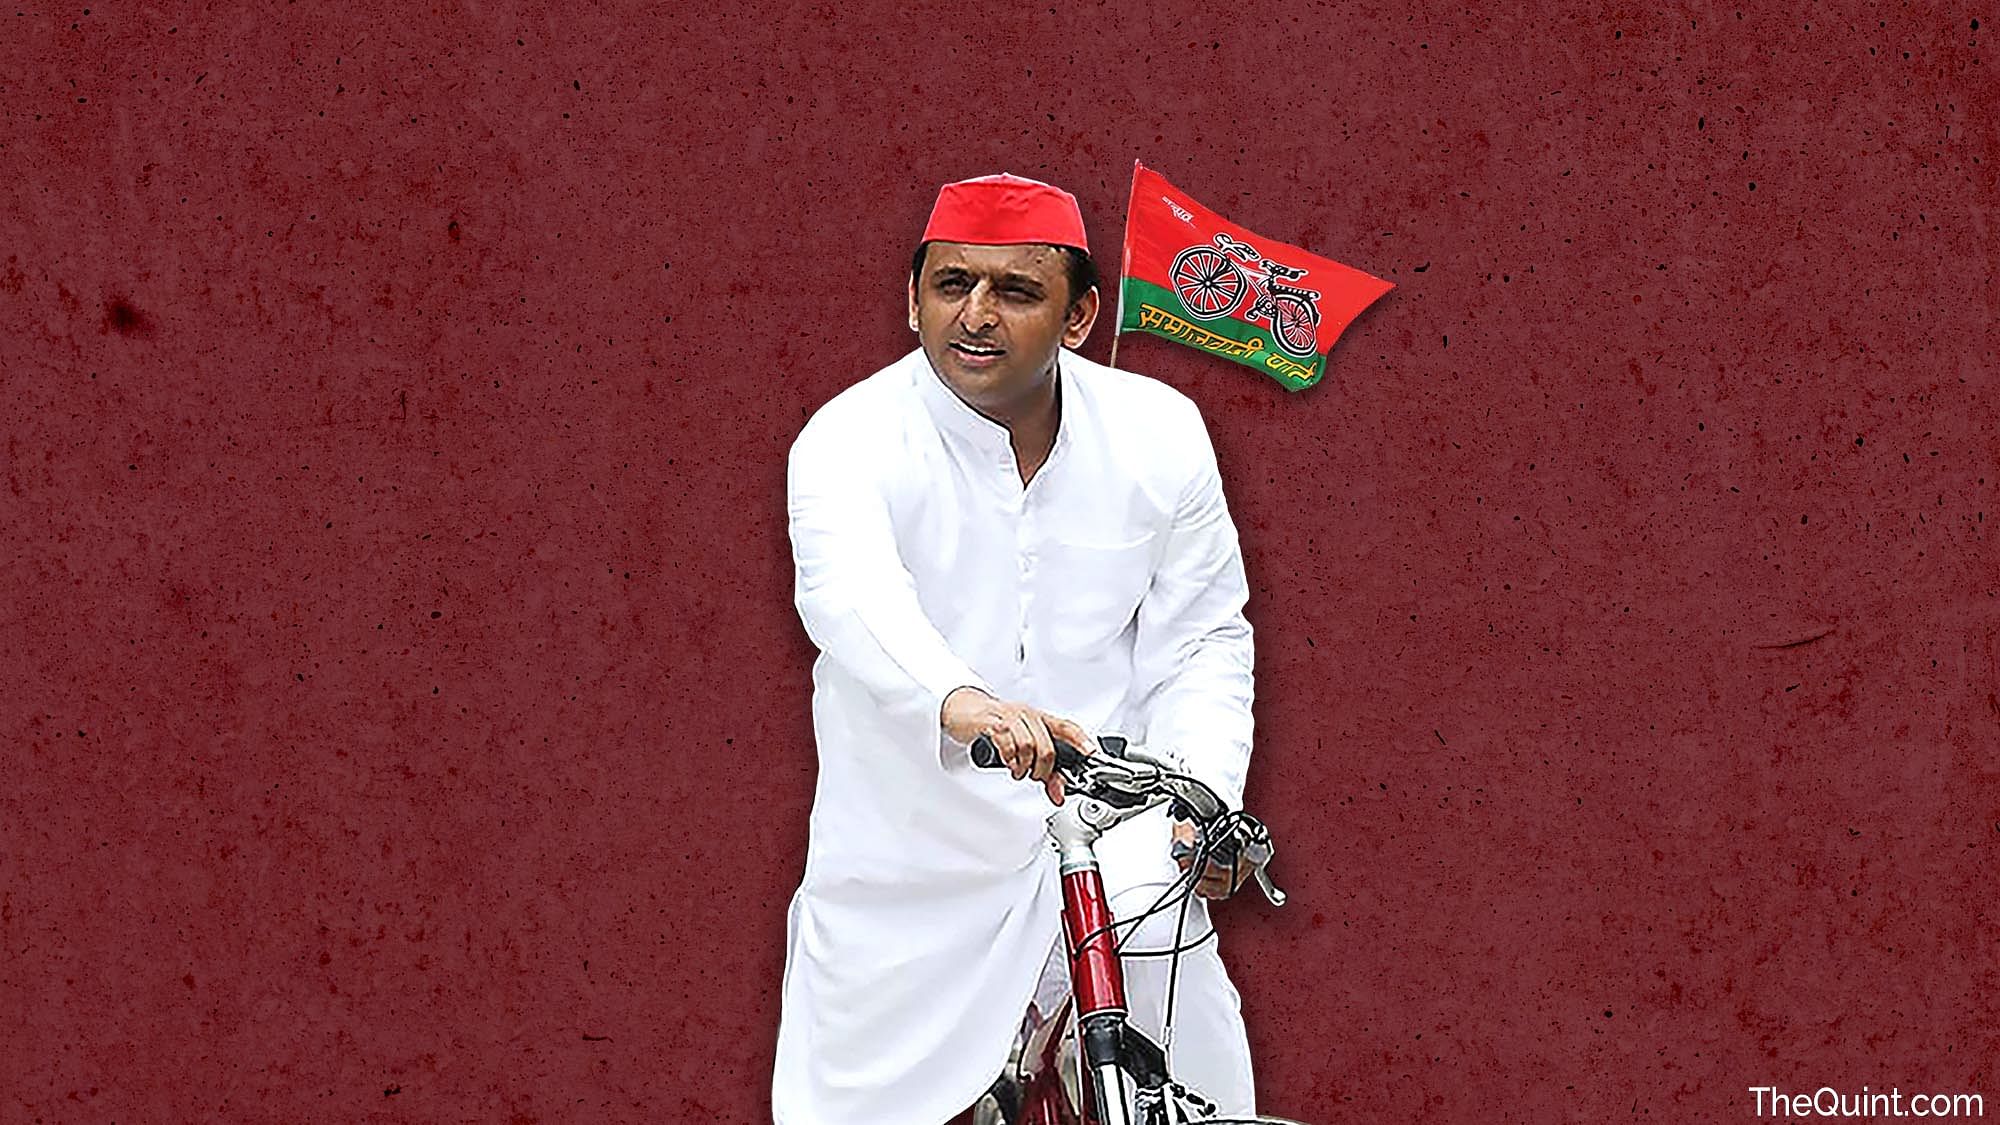 Enthused by his victory in the tussle over cycle and backed by non-BJP alliance, Akhilesh hopes for a comeback in UP. (Photo: Harsh Sahani/ <b>The Quint</b>)